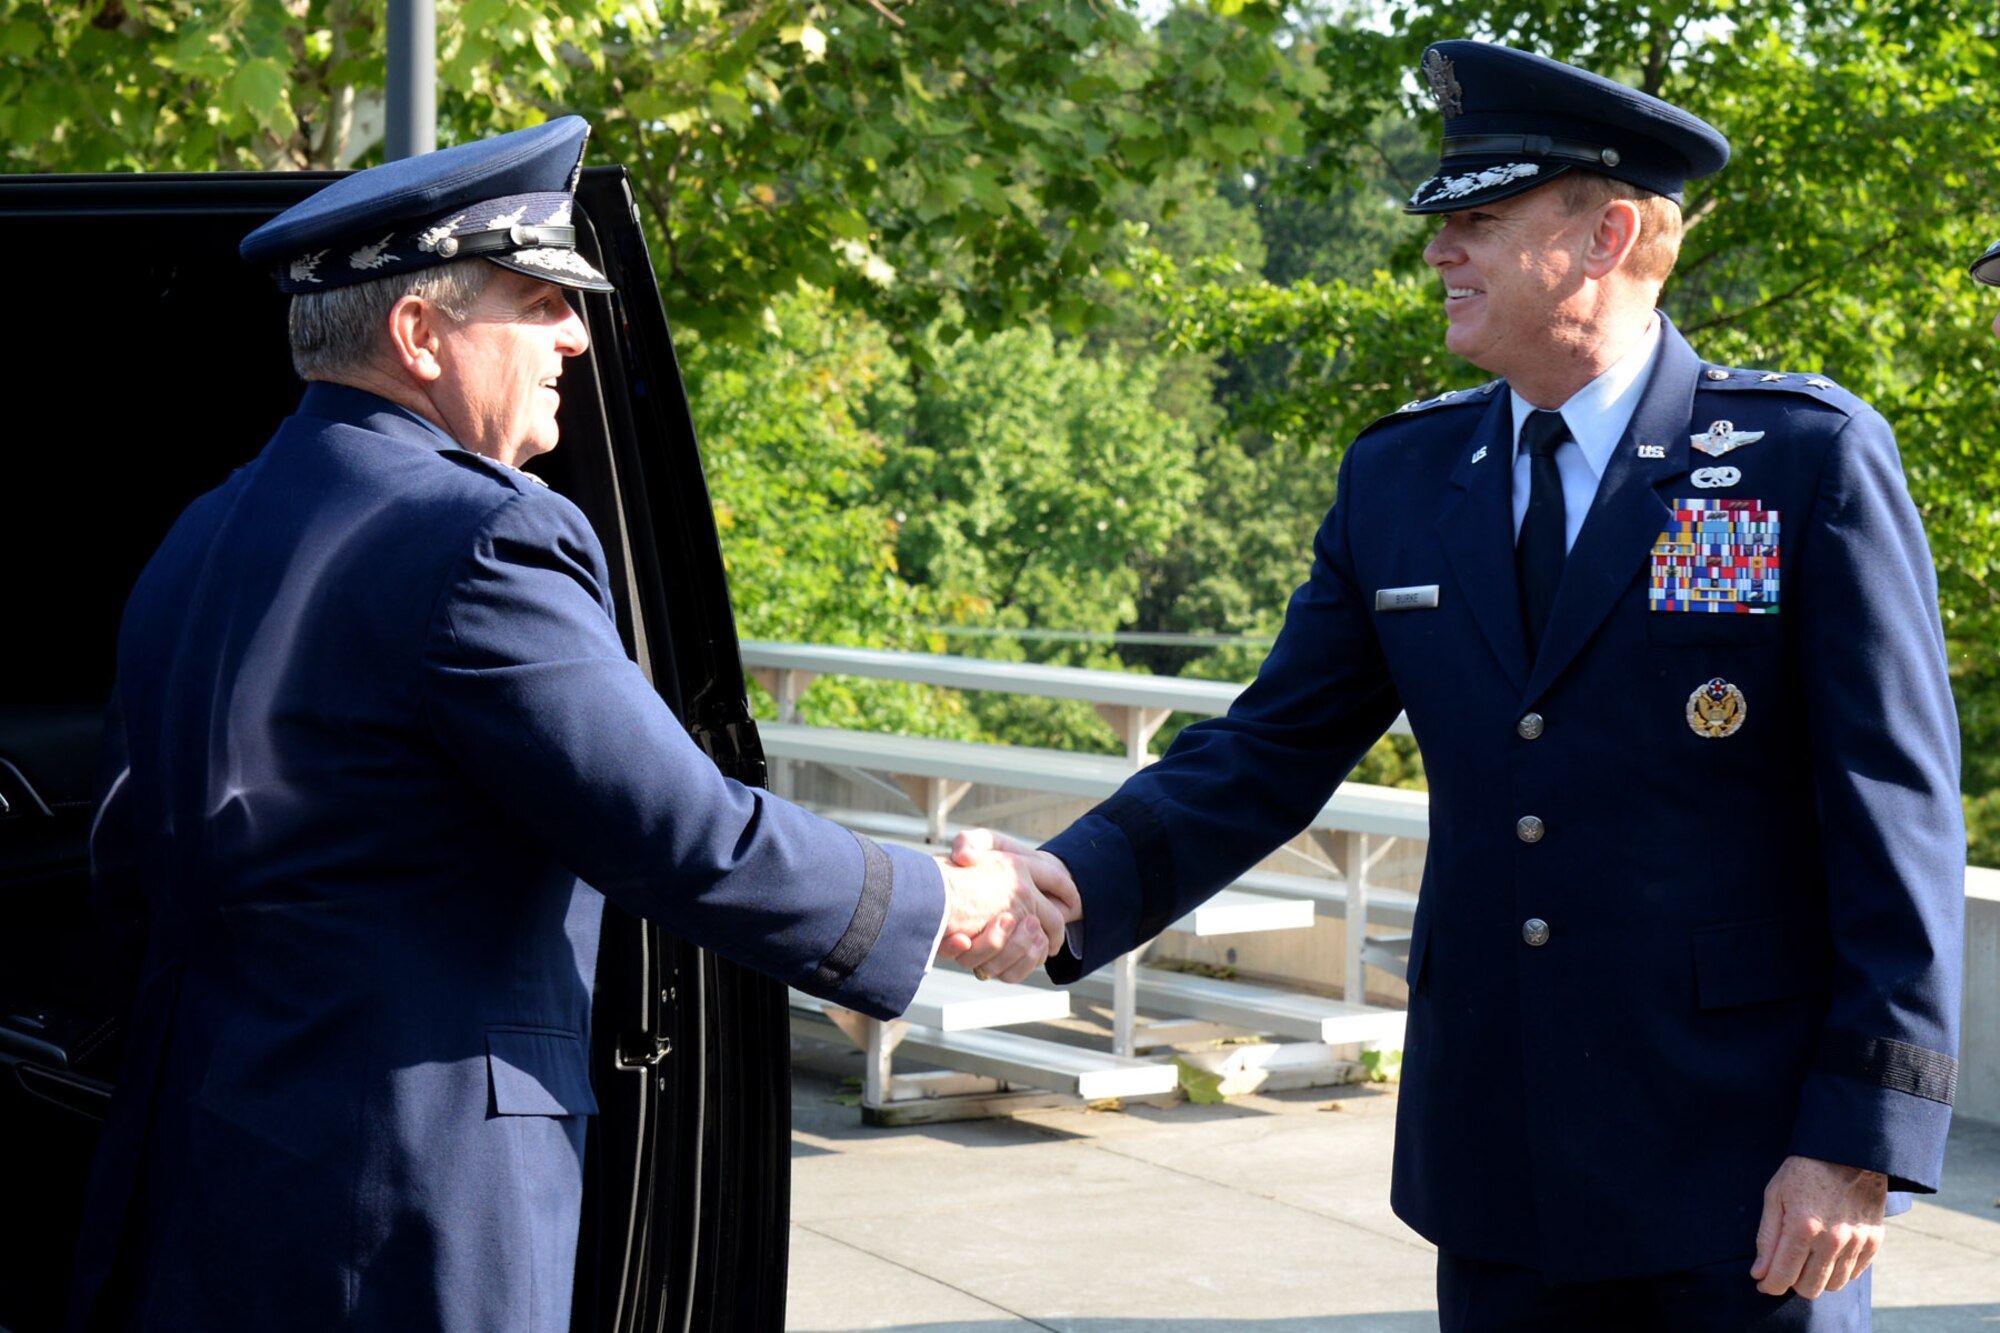 Air Force District of Washington Commander Maj. Gen. Darryl Burke greets Air
Force Chief of Staff Gen. Mark A. Welsh III before ceremonies begin
welcoming Maj. Gen. Laurian Anastasof, Chief of Air Staff of the Romanian
Air Force. Gen. Anastasof visited the National Capital Region as part of the
U.S. Air Force's Counterpart Visit Program. The Air Force District of
Washington brings air, space and cyberspace capabilities to the joint team
protecting the nation's capital, and supports local personnel and those
serving worldwide. (U.S. Air Force Photo/Tech. Sgt. Matt Davis)

